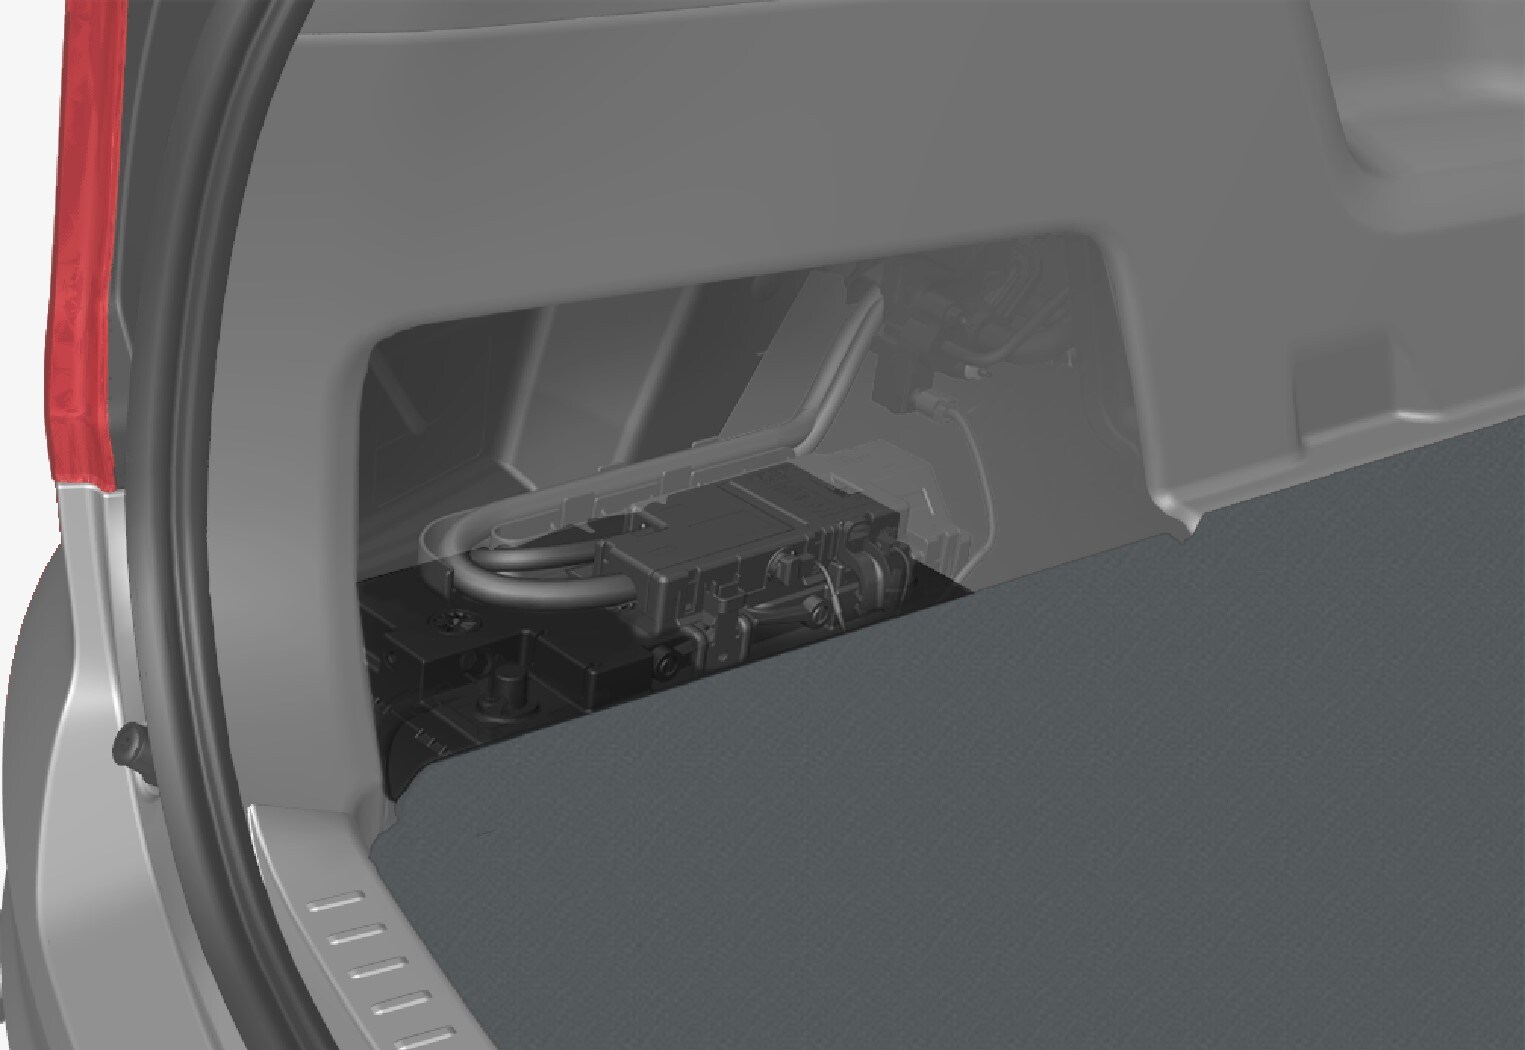 The starter battery is located in the cargo area.